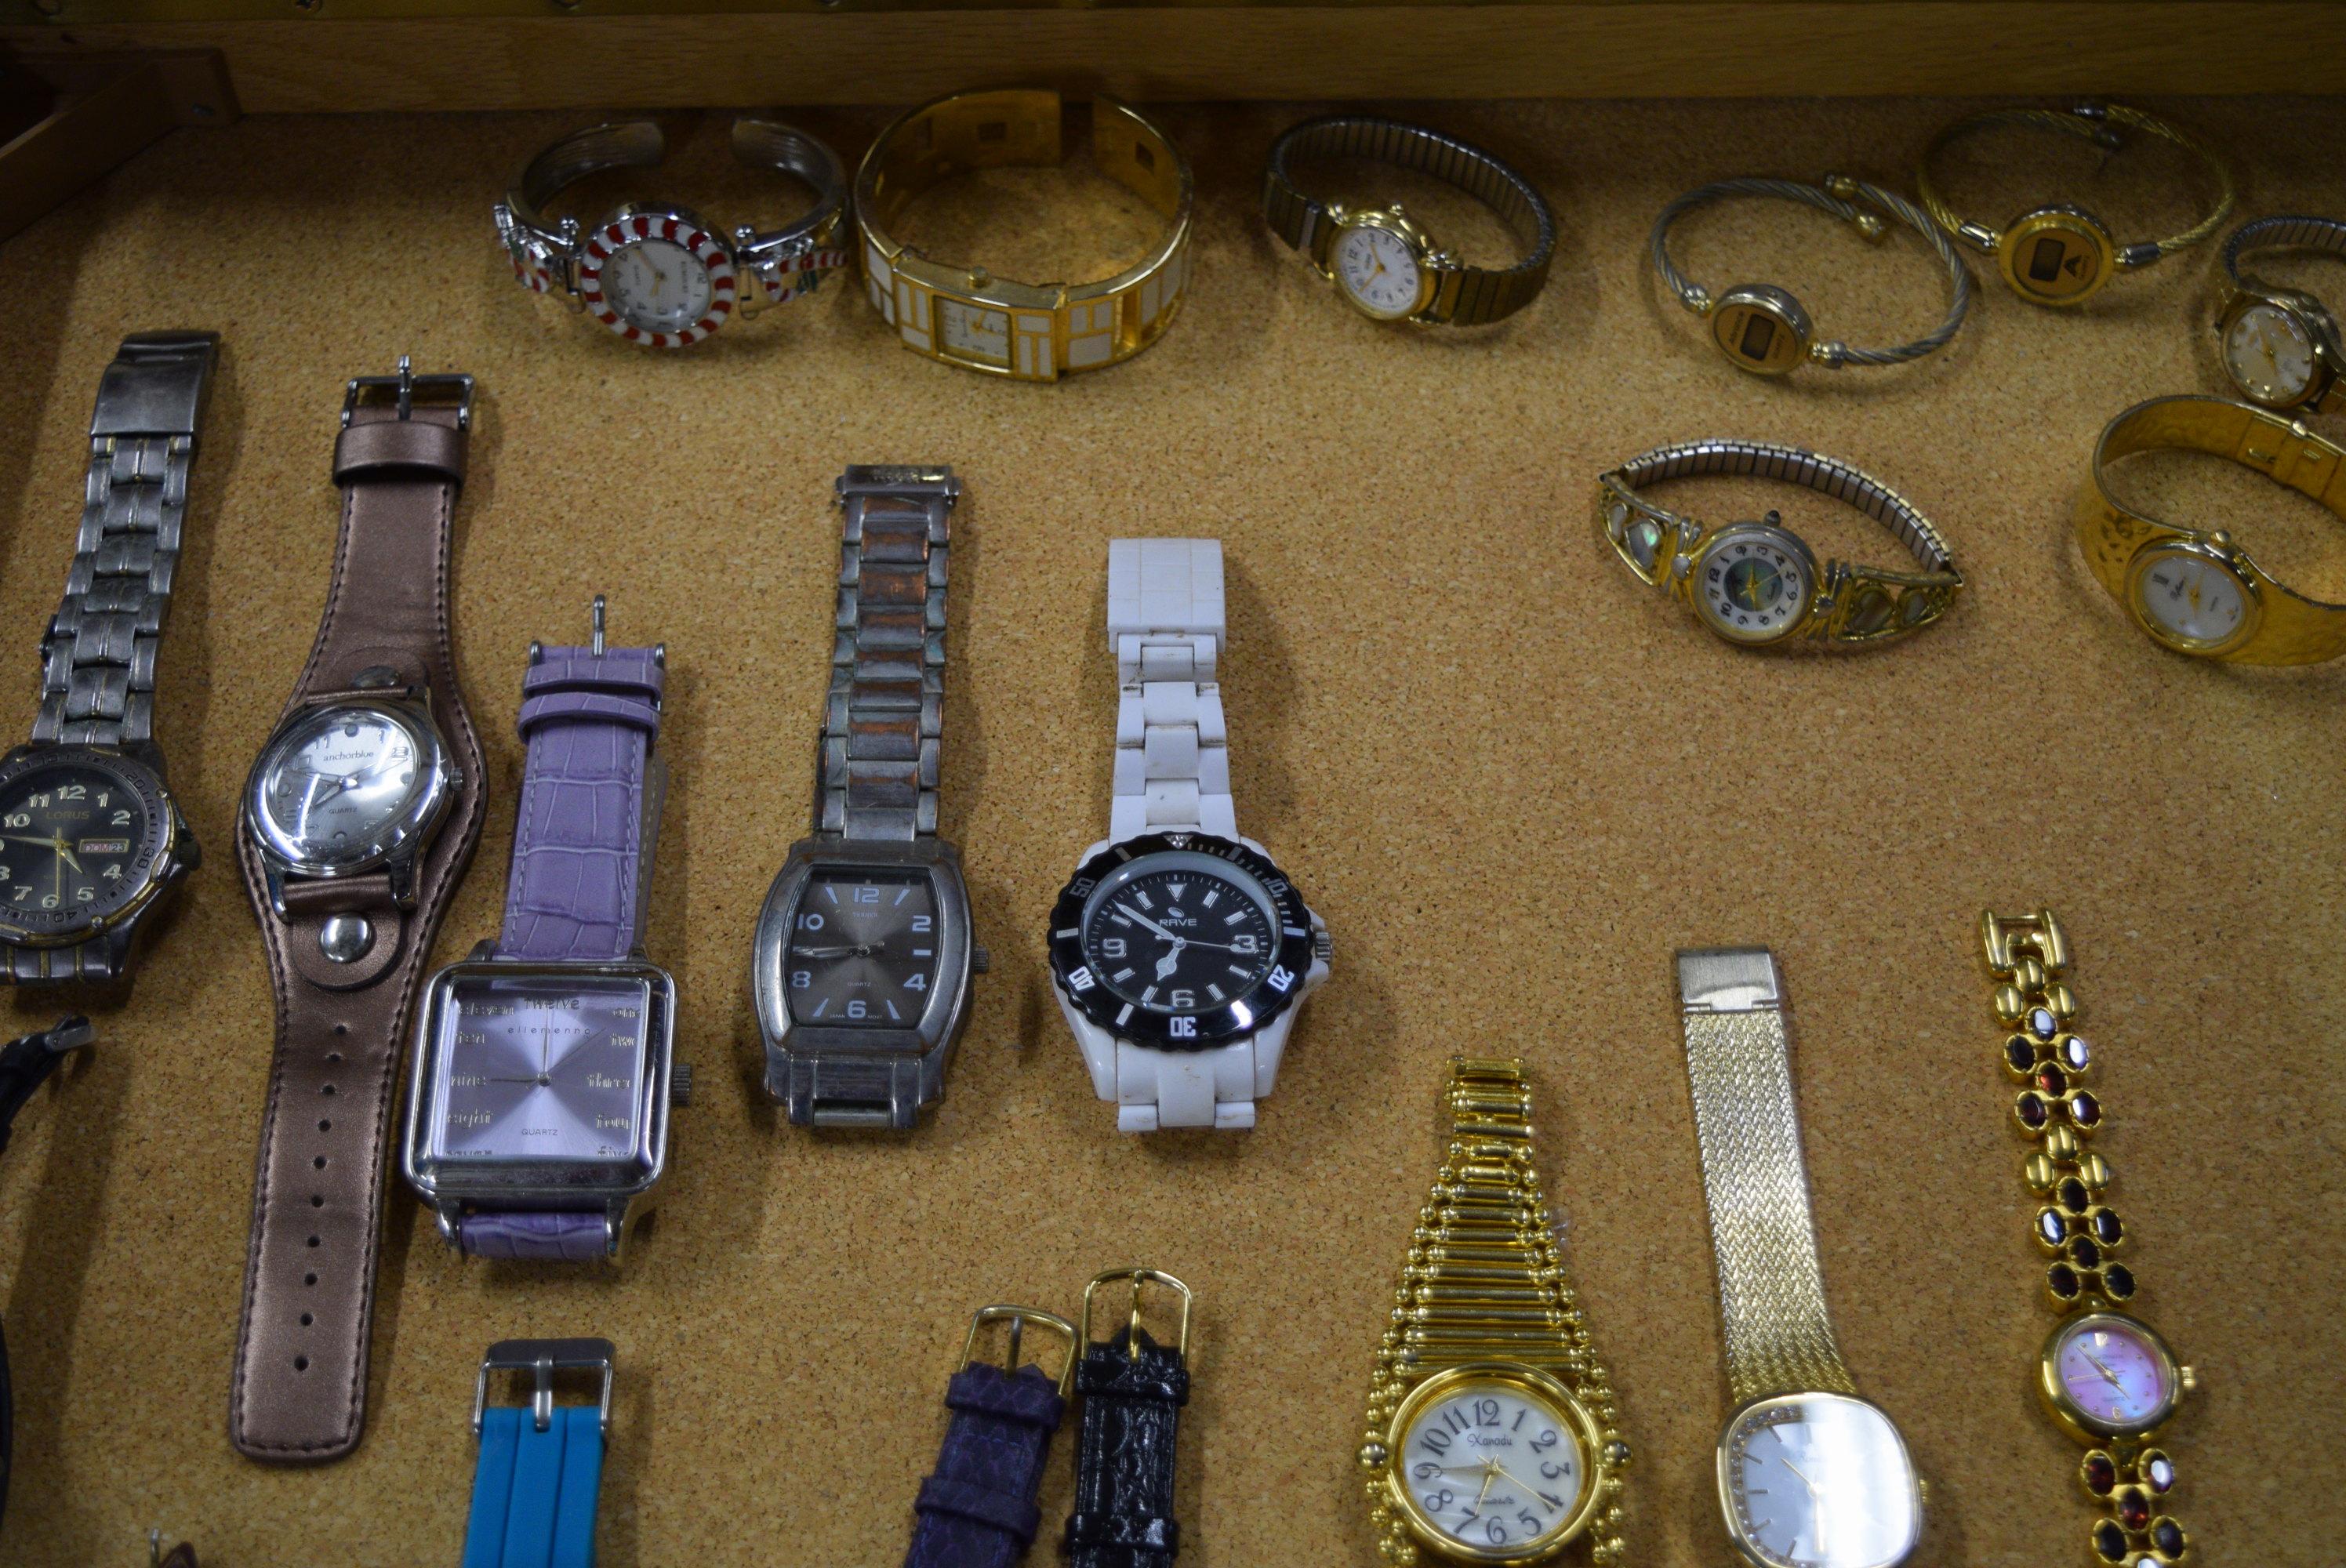 LARGE DISPLAY OF WATCHES!